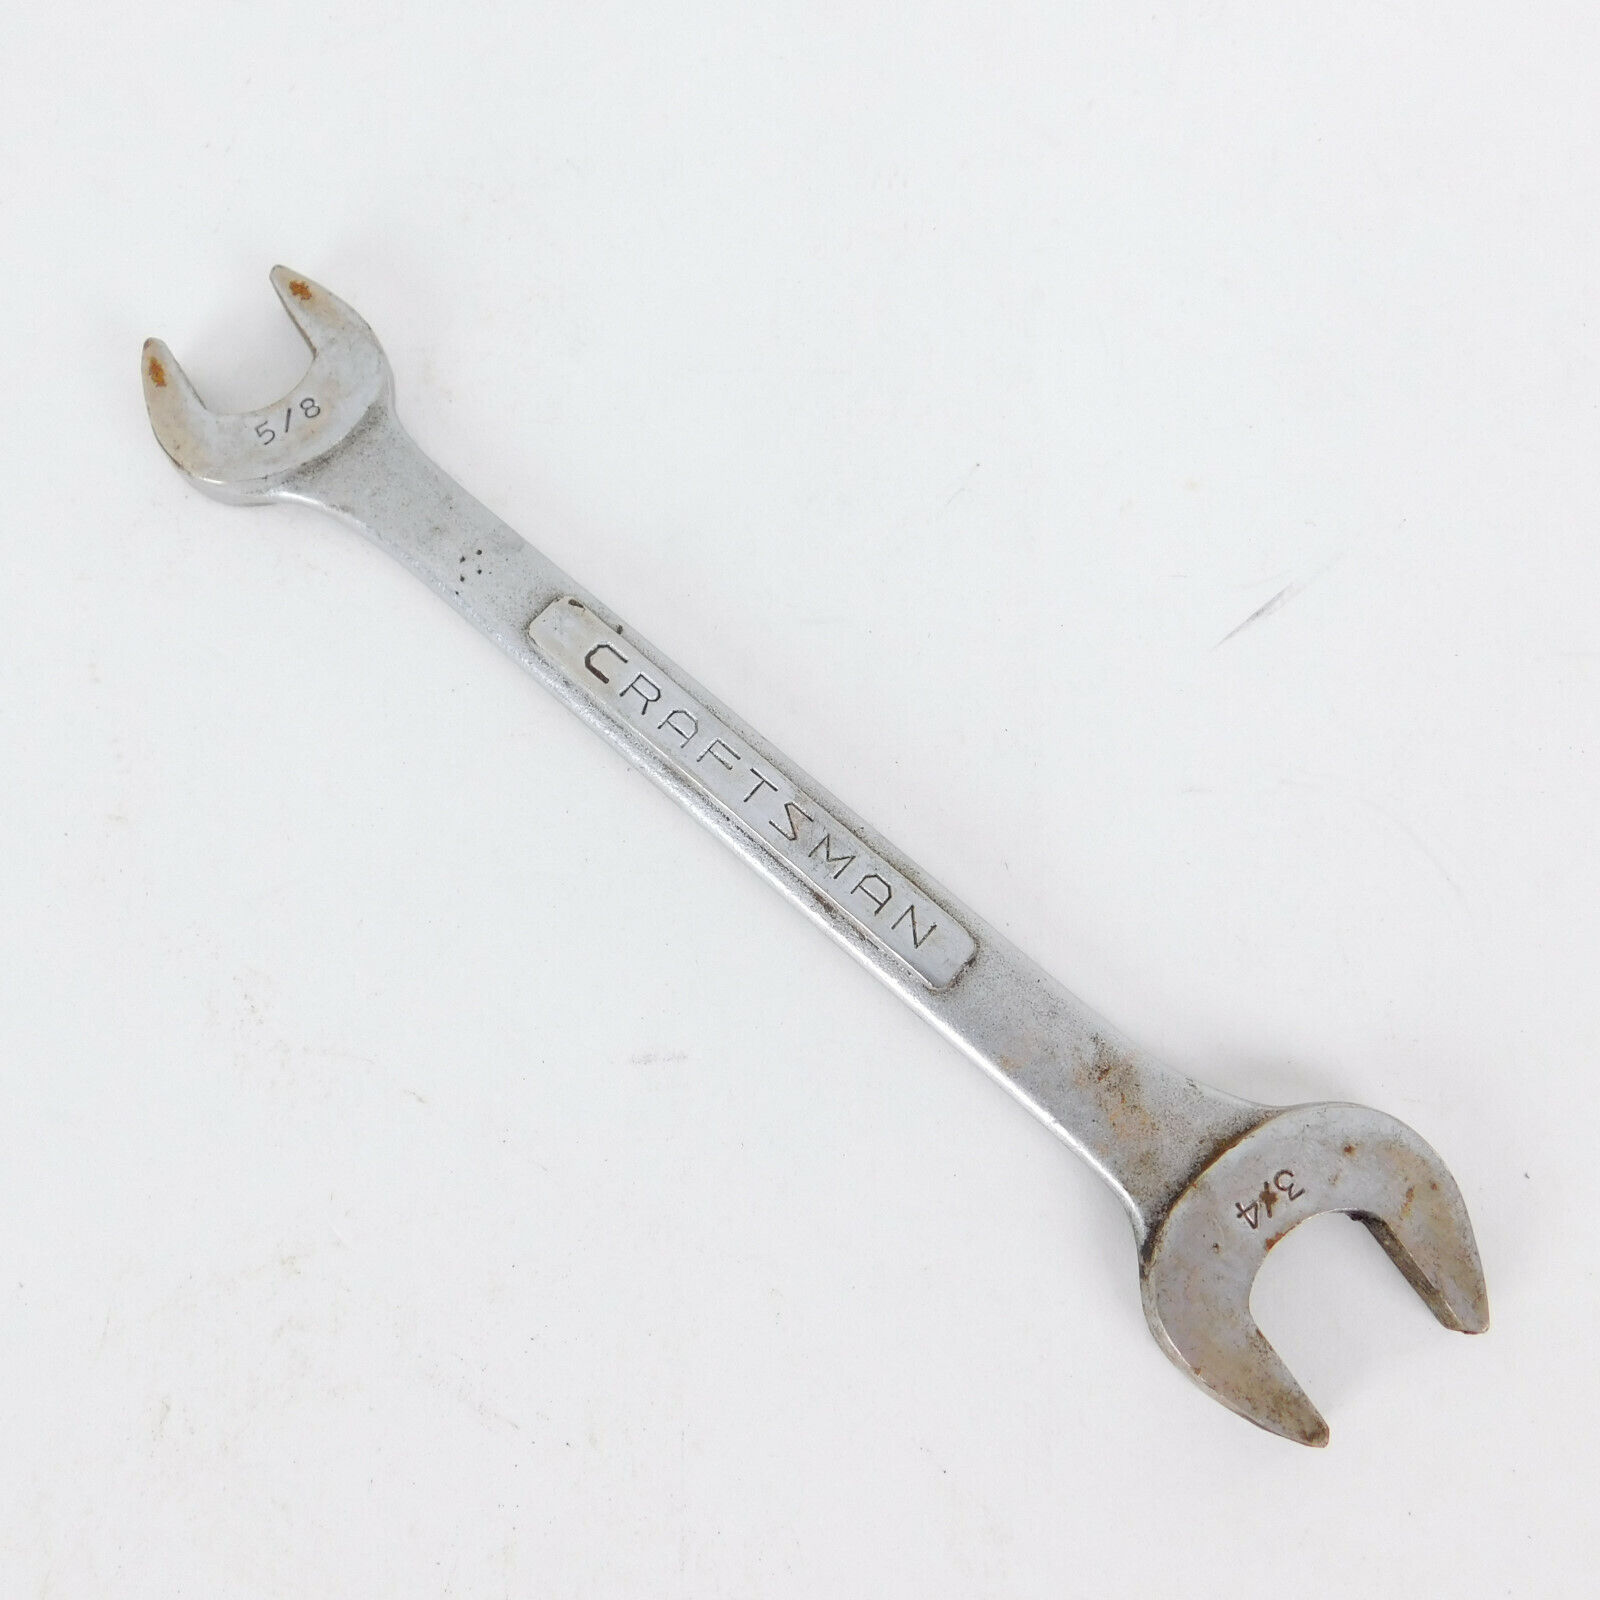 Craftsman 3/4 & 5/8 Double Open End Wrench -V- 44582 U.S.A.